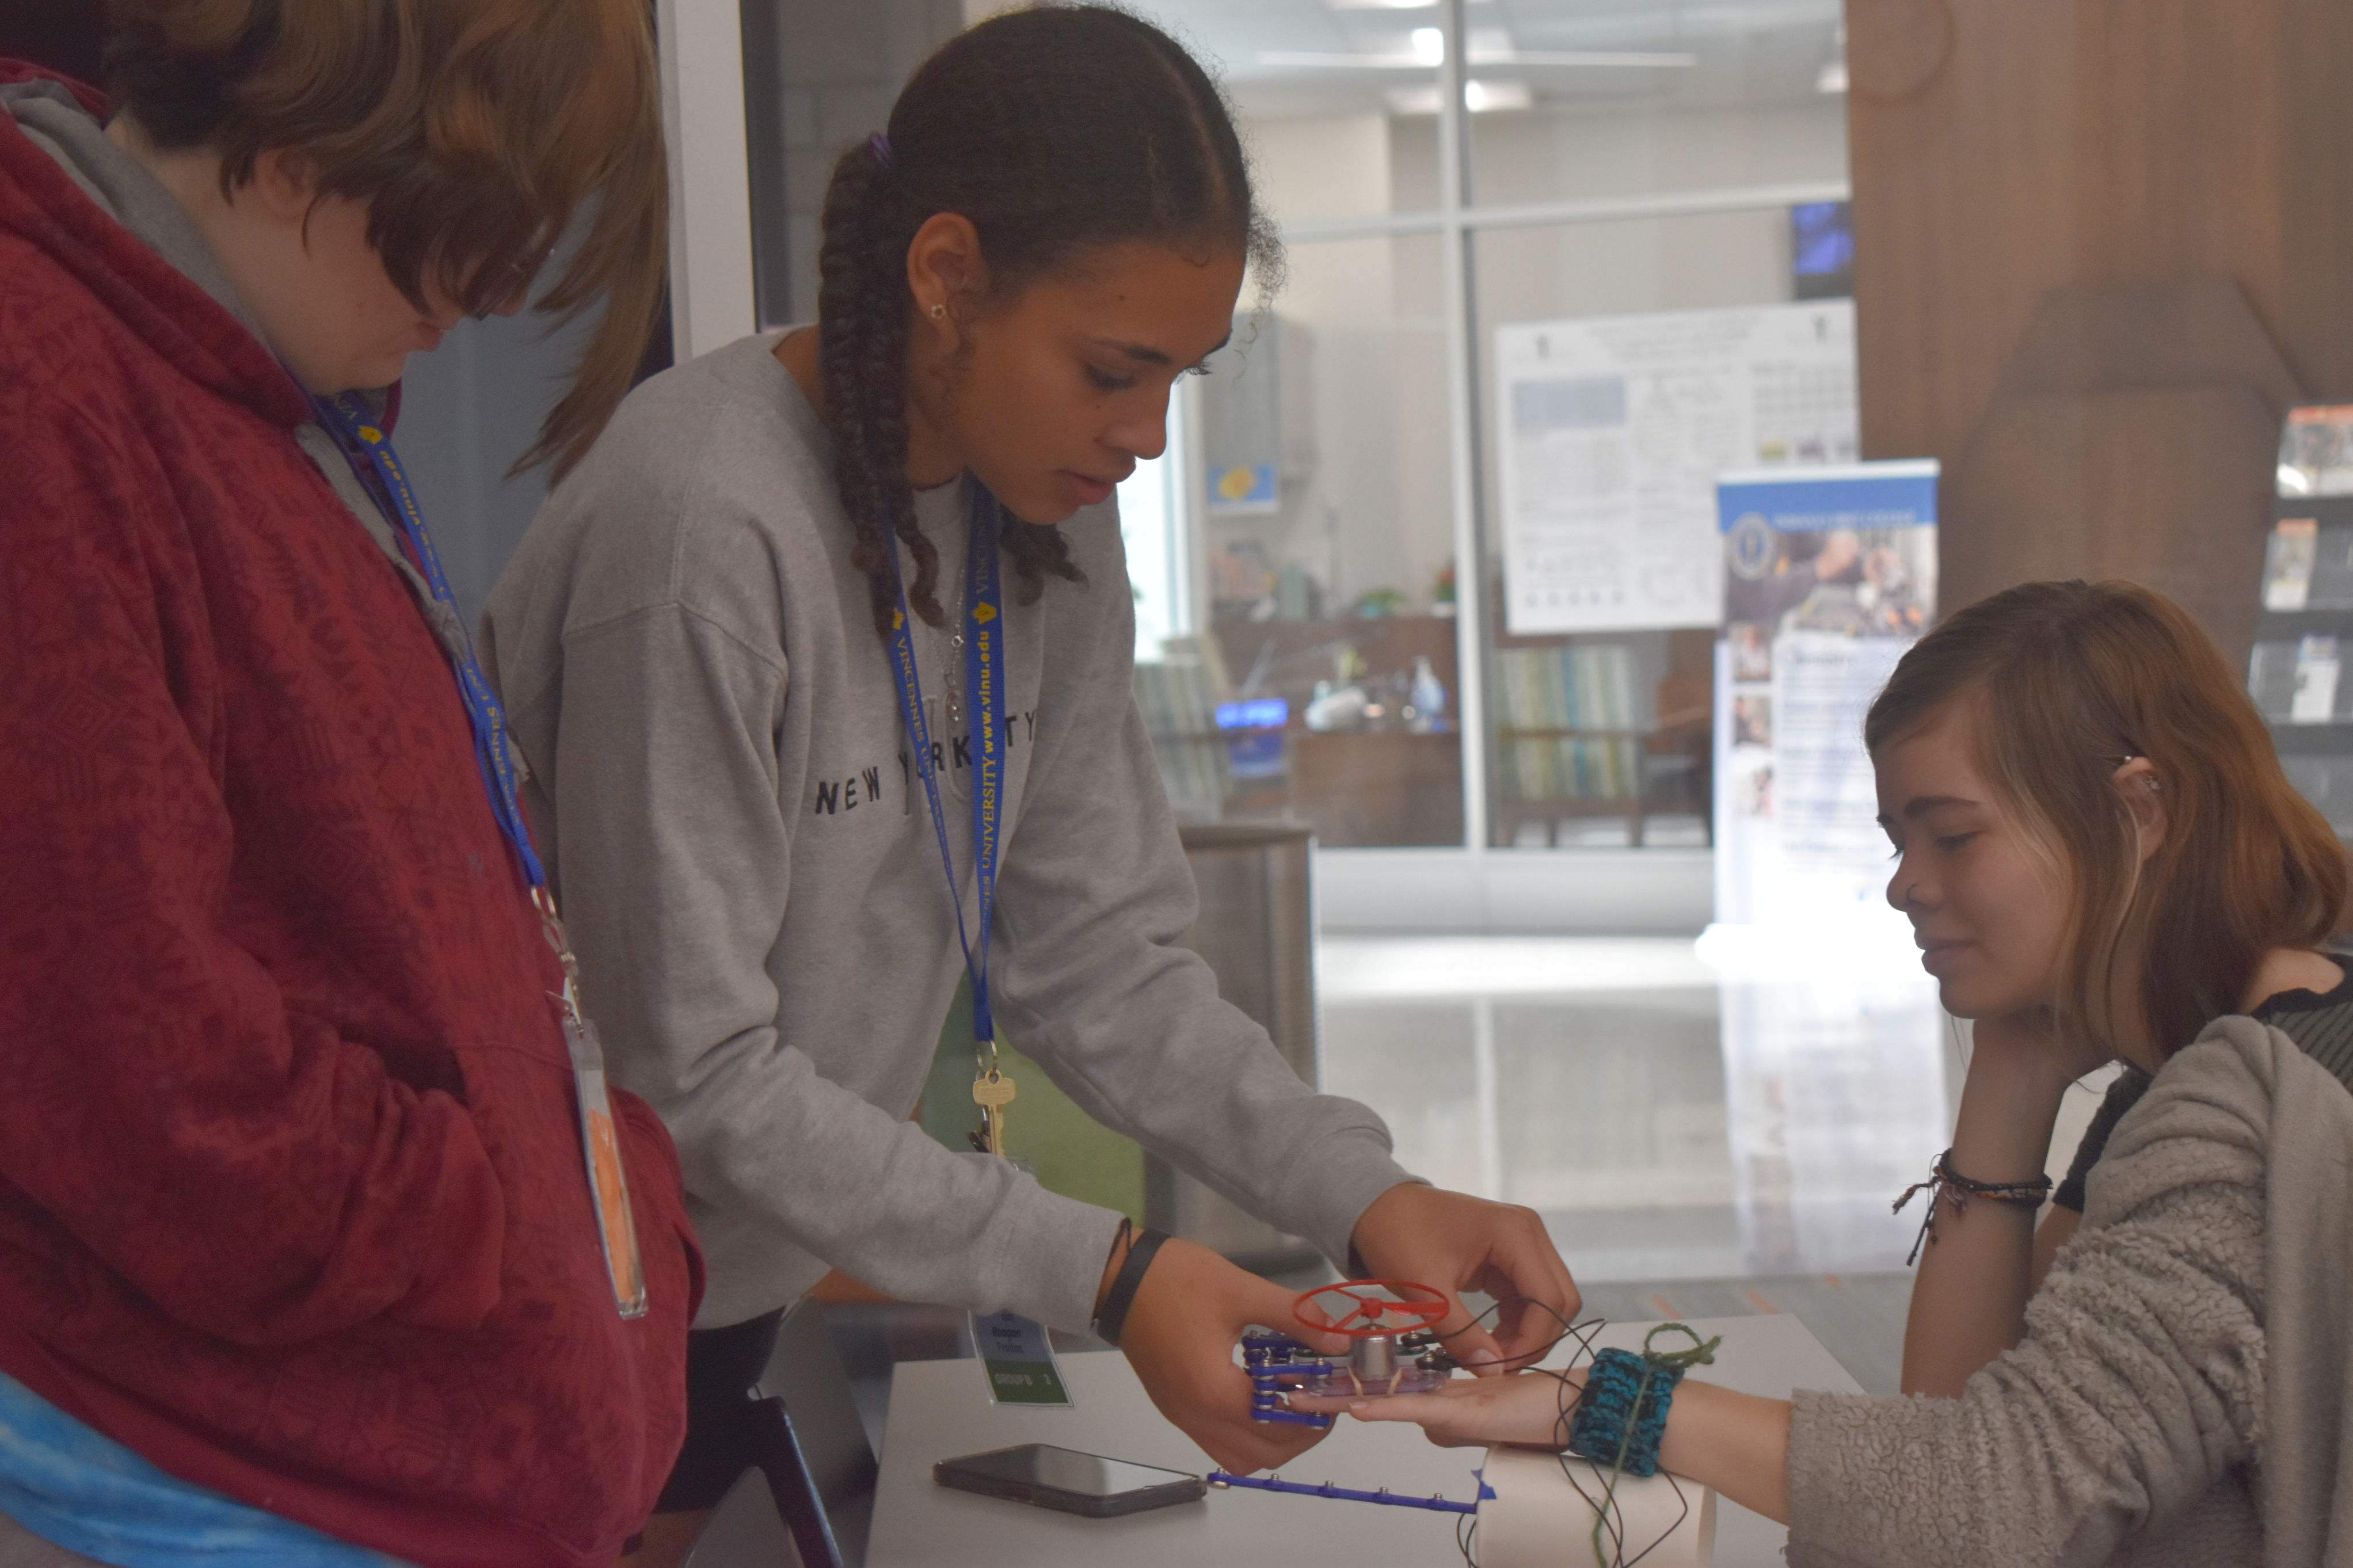 Students create a biomechanical hand while learning about physics and physiology.